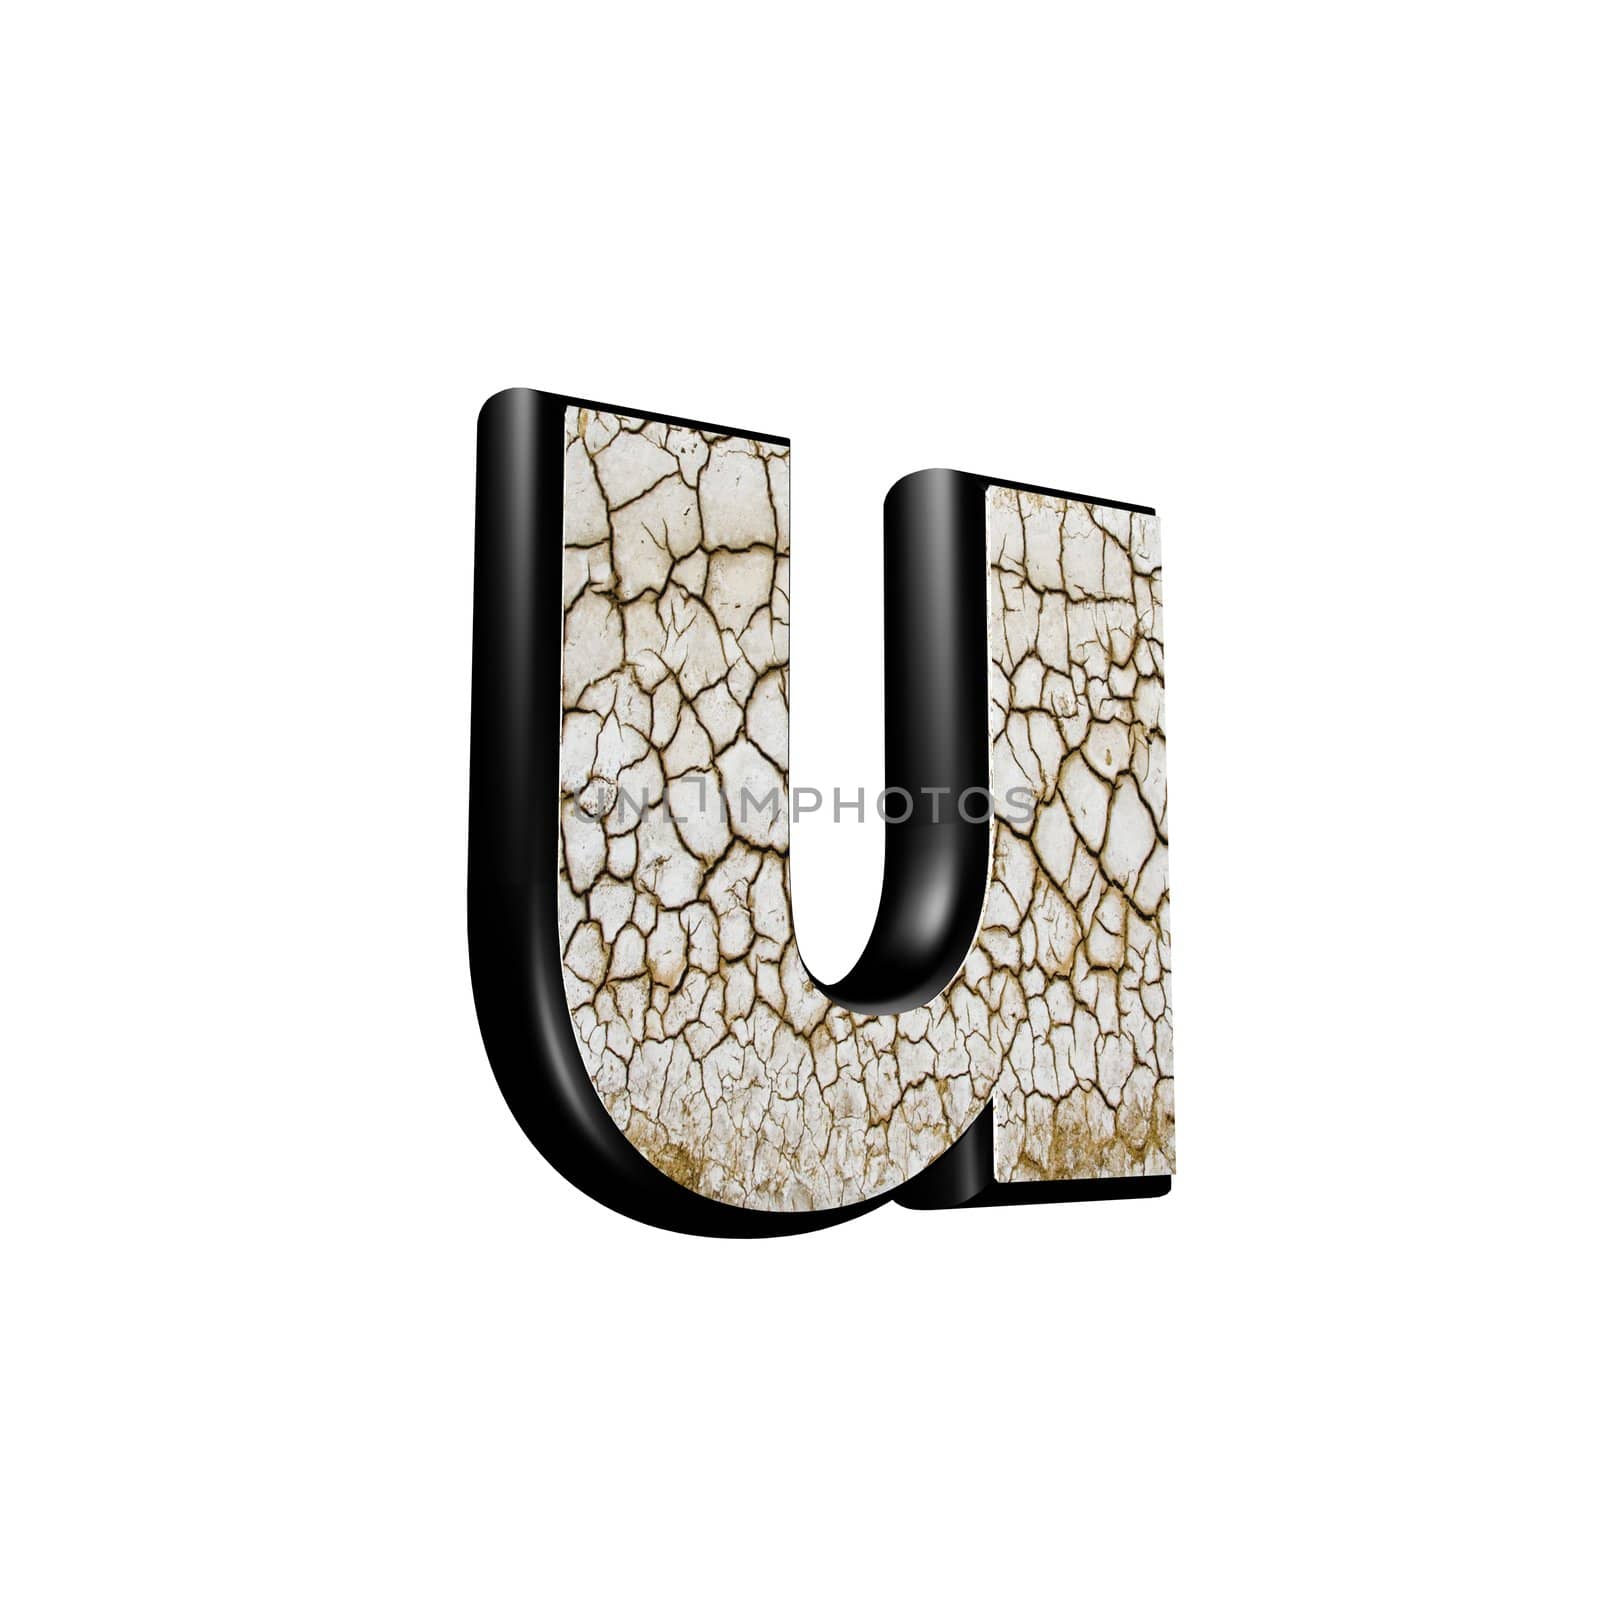 abstract 3d letter with dry ground texture - U by chrisroll